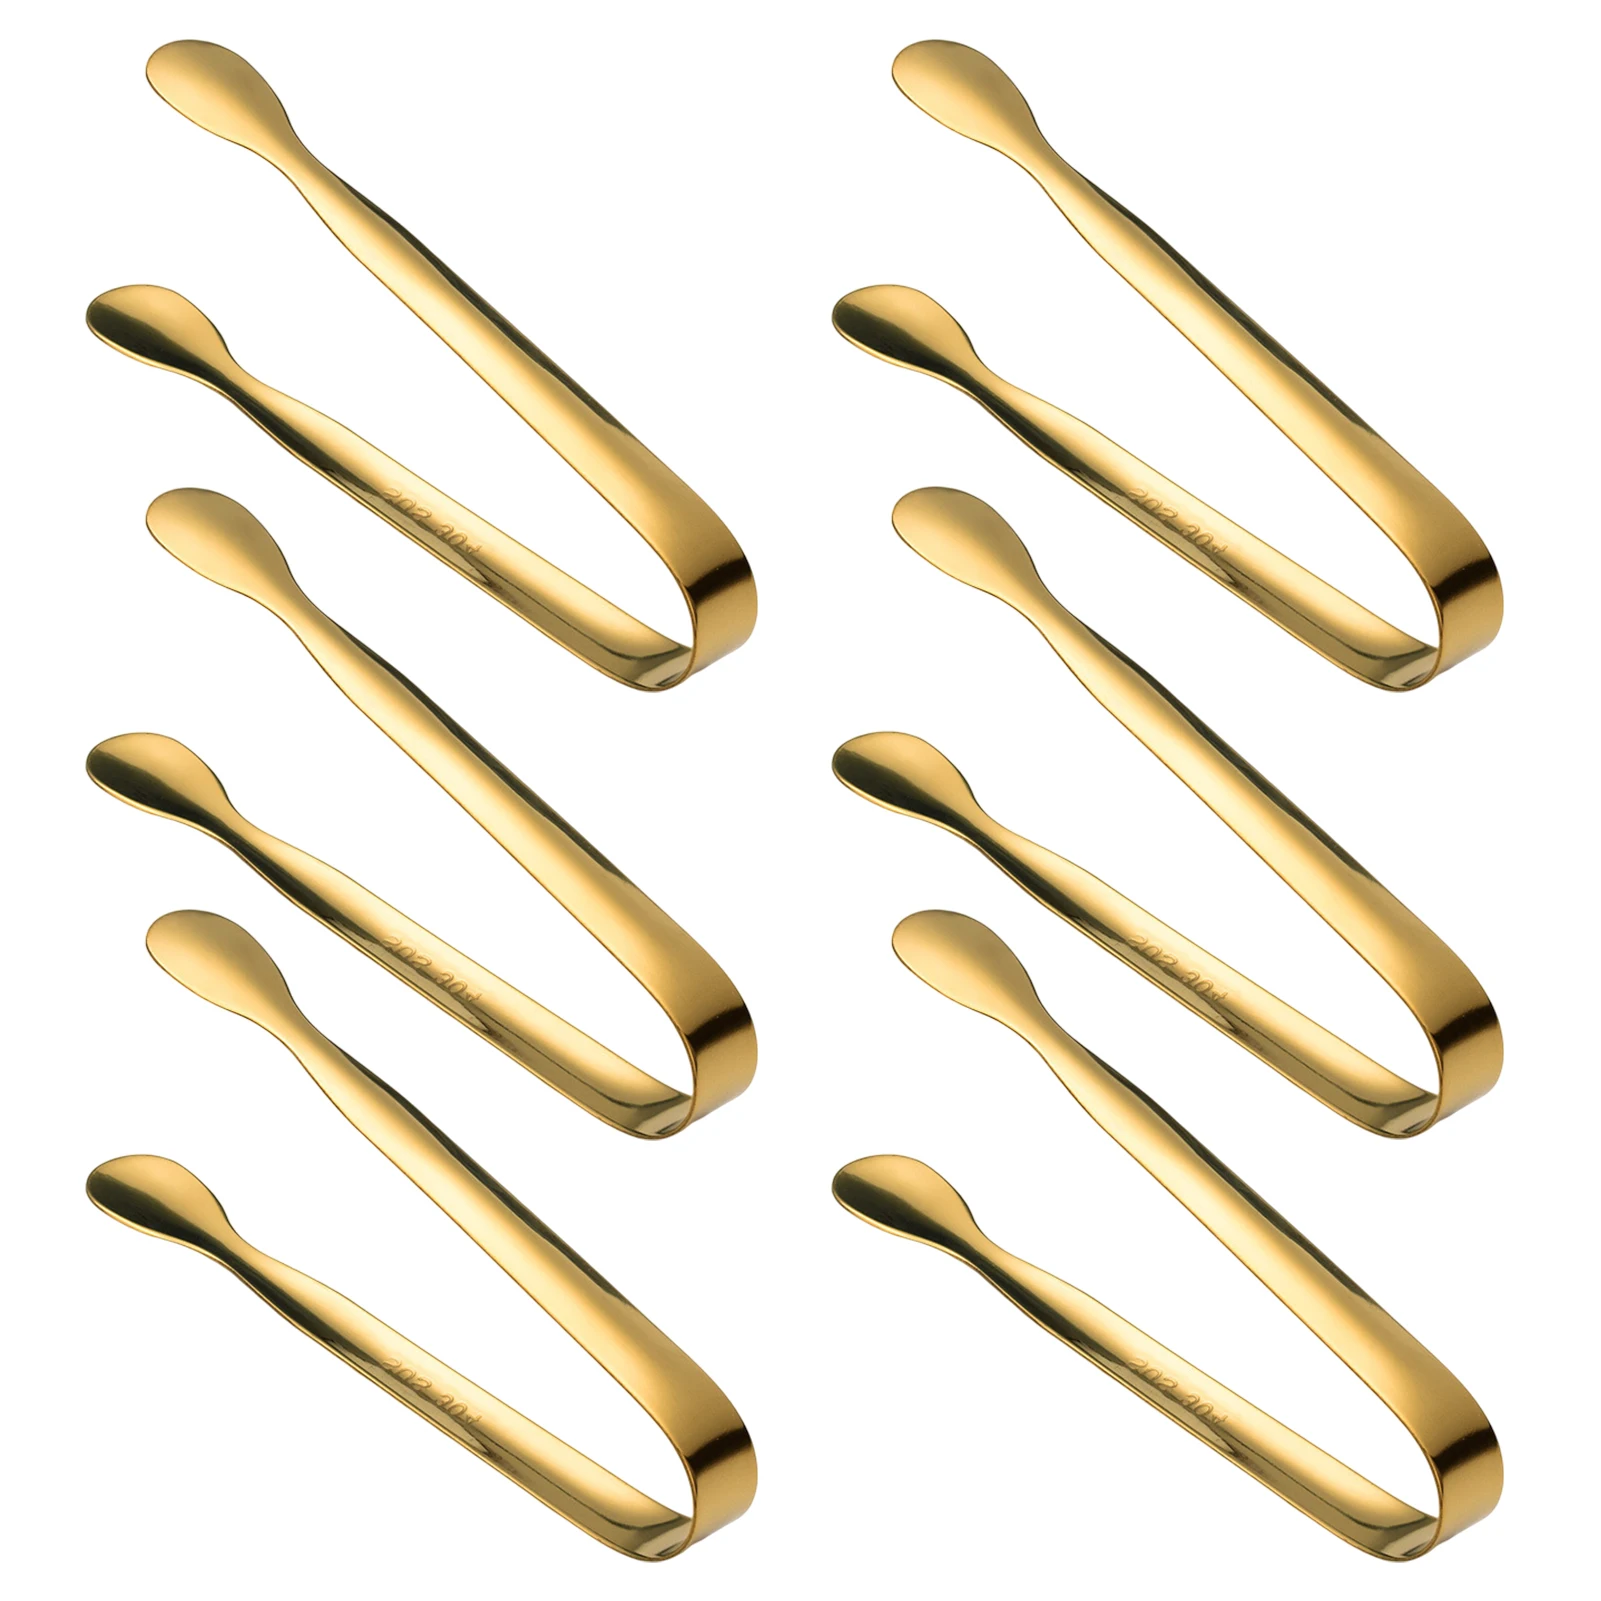 

6pcs Ice Tongs Multipurpose Durable Rust Proof Wedding Gold Food Serving Stainless Steel Kitchen Utensils Smooth Handle Parties